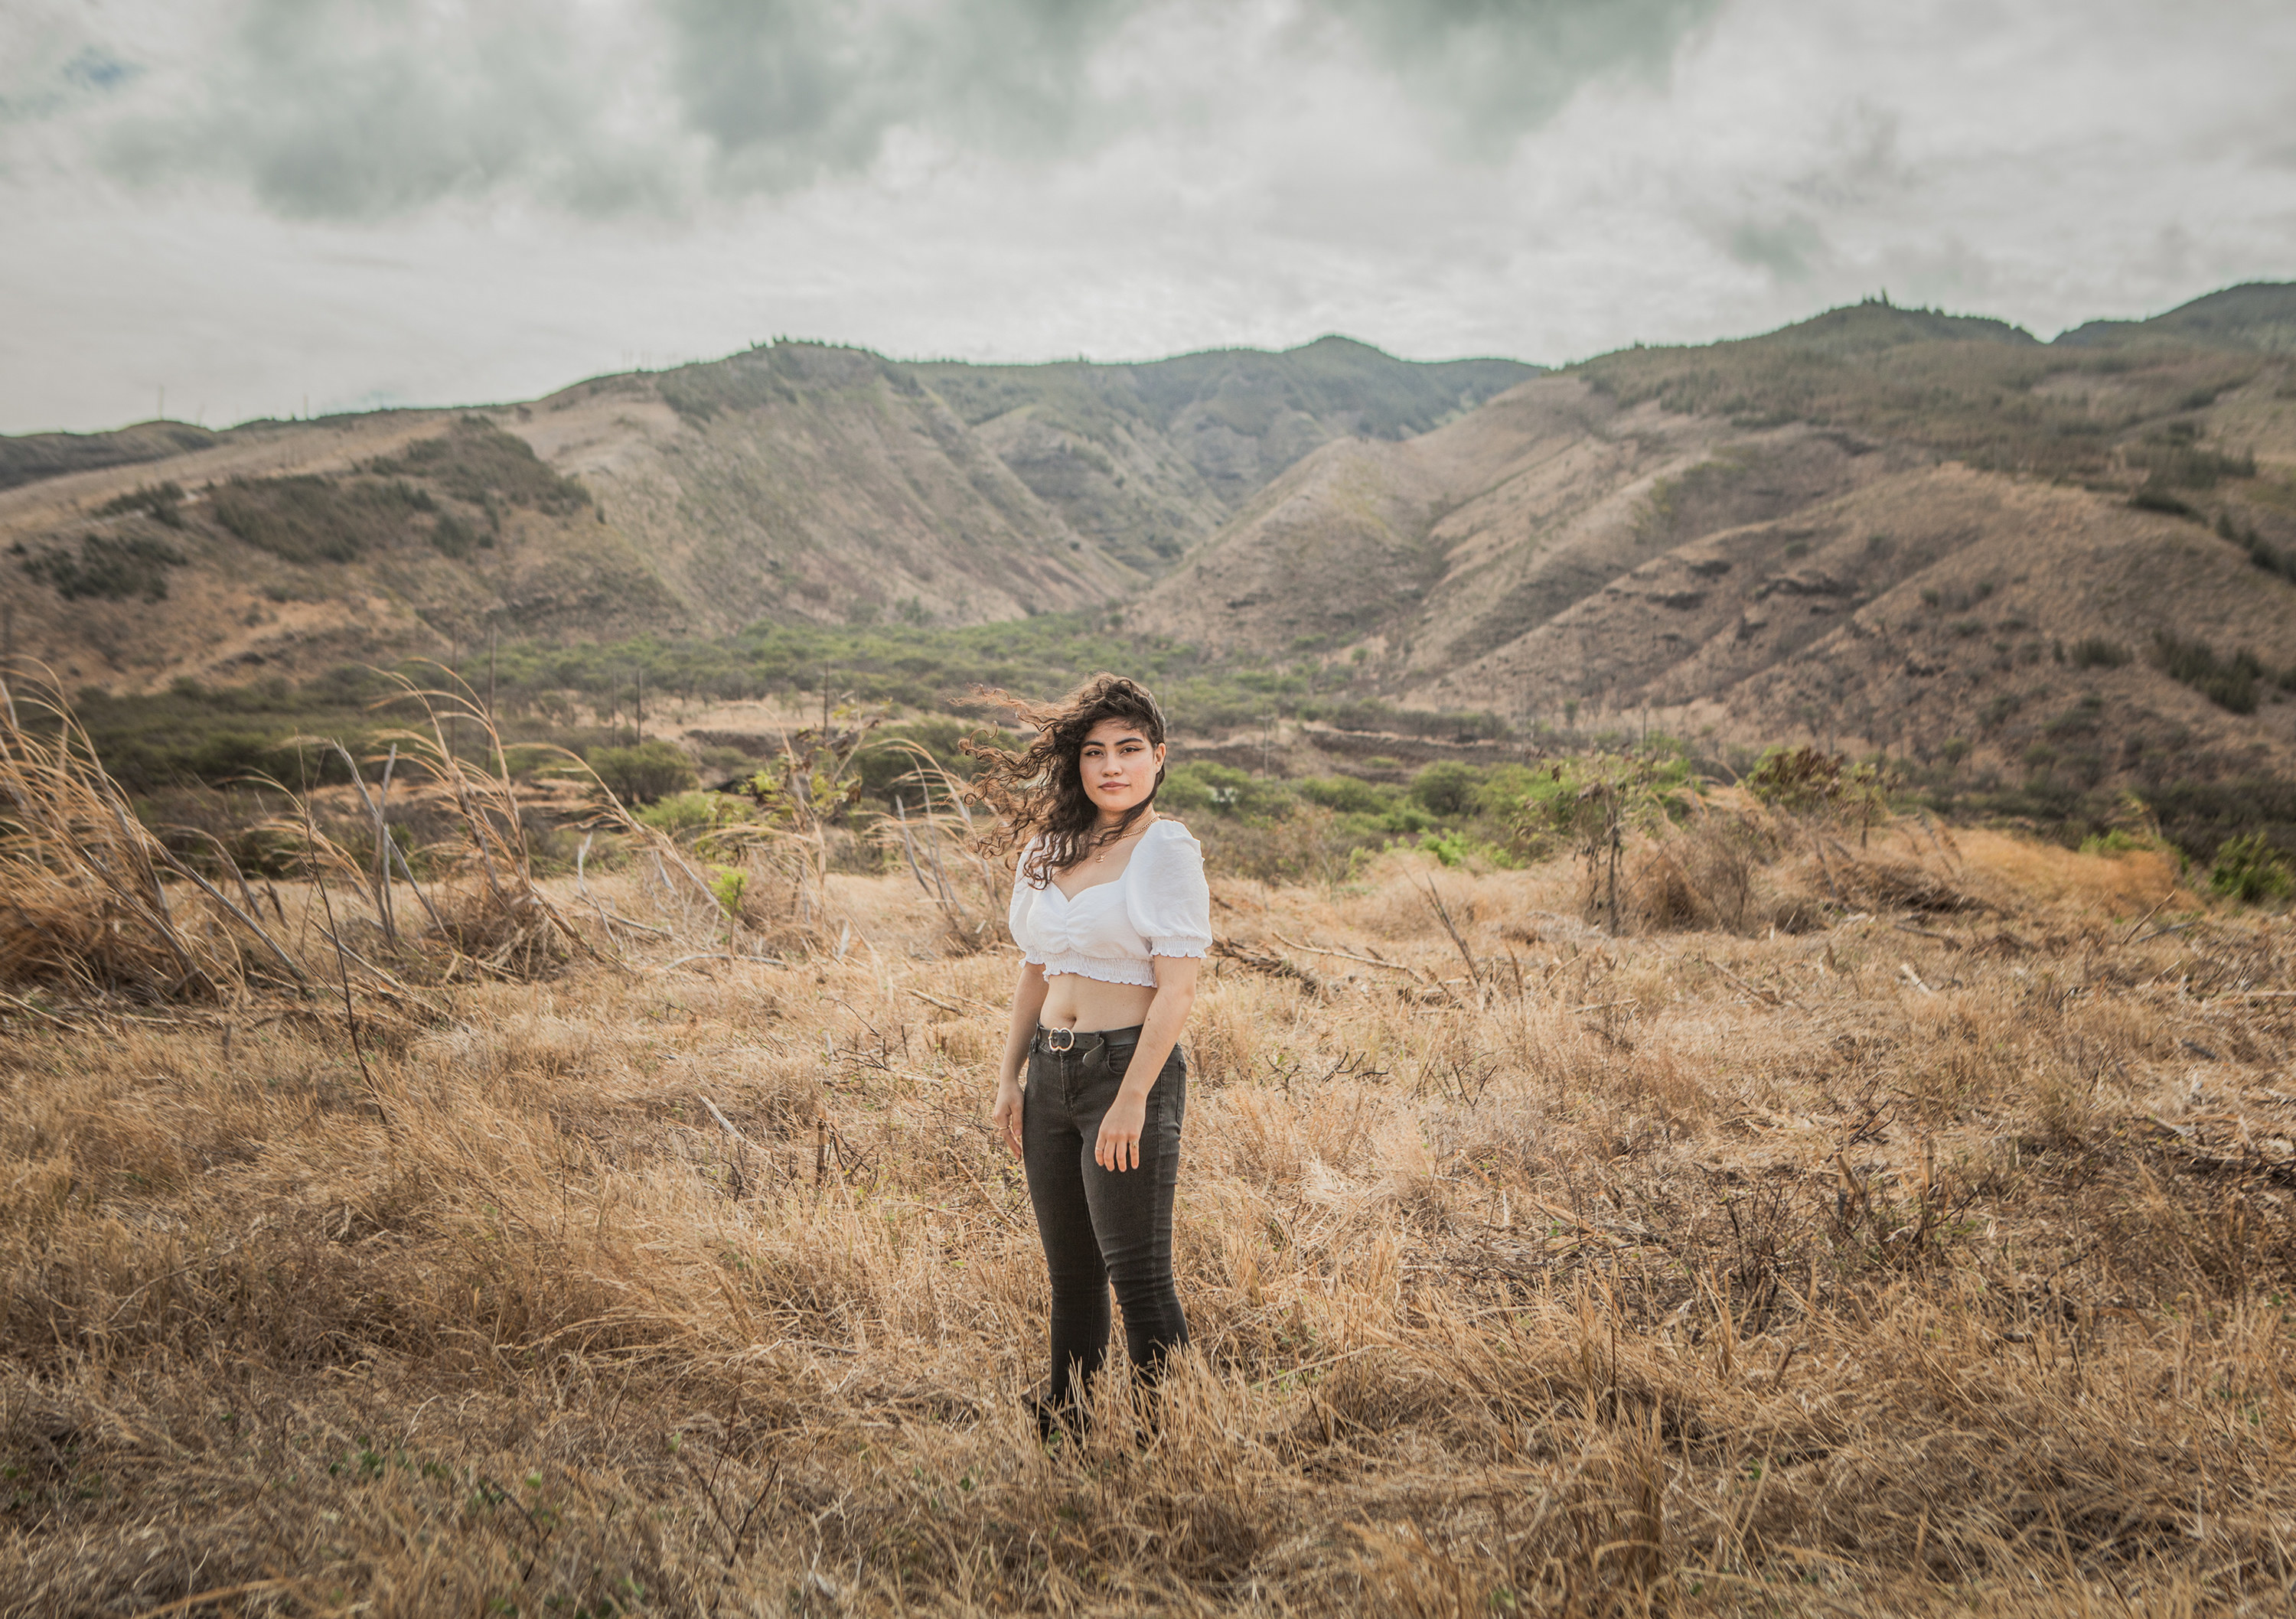 A young woman in a crop top in a hilly landscape